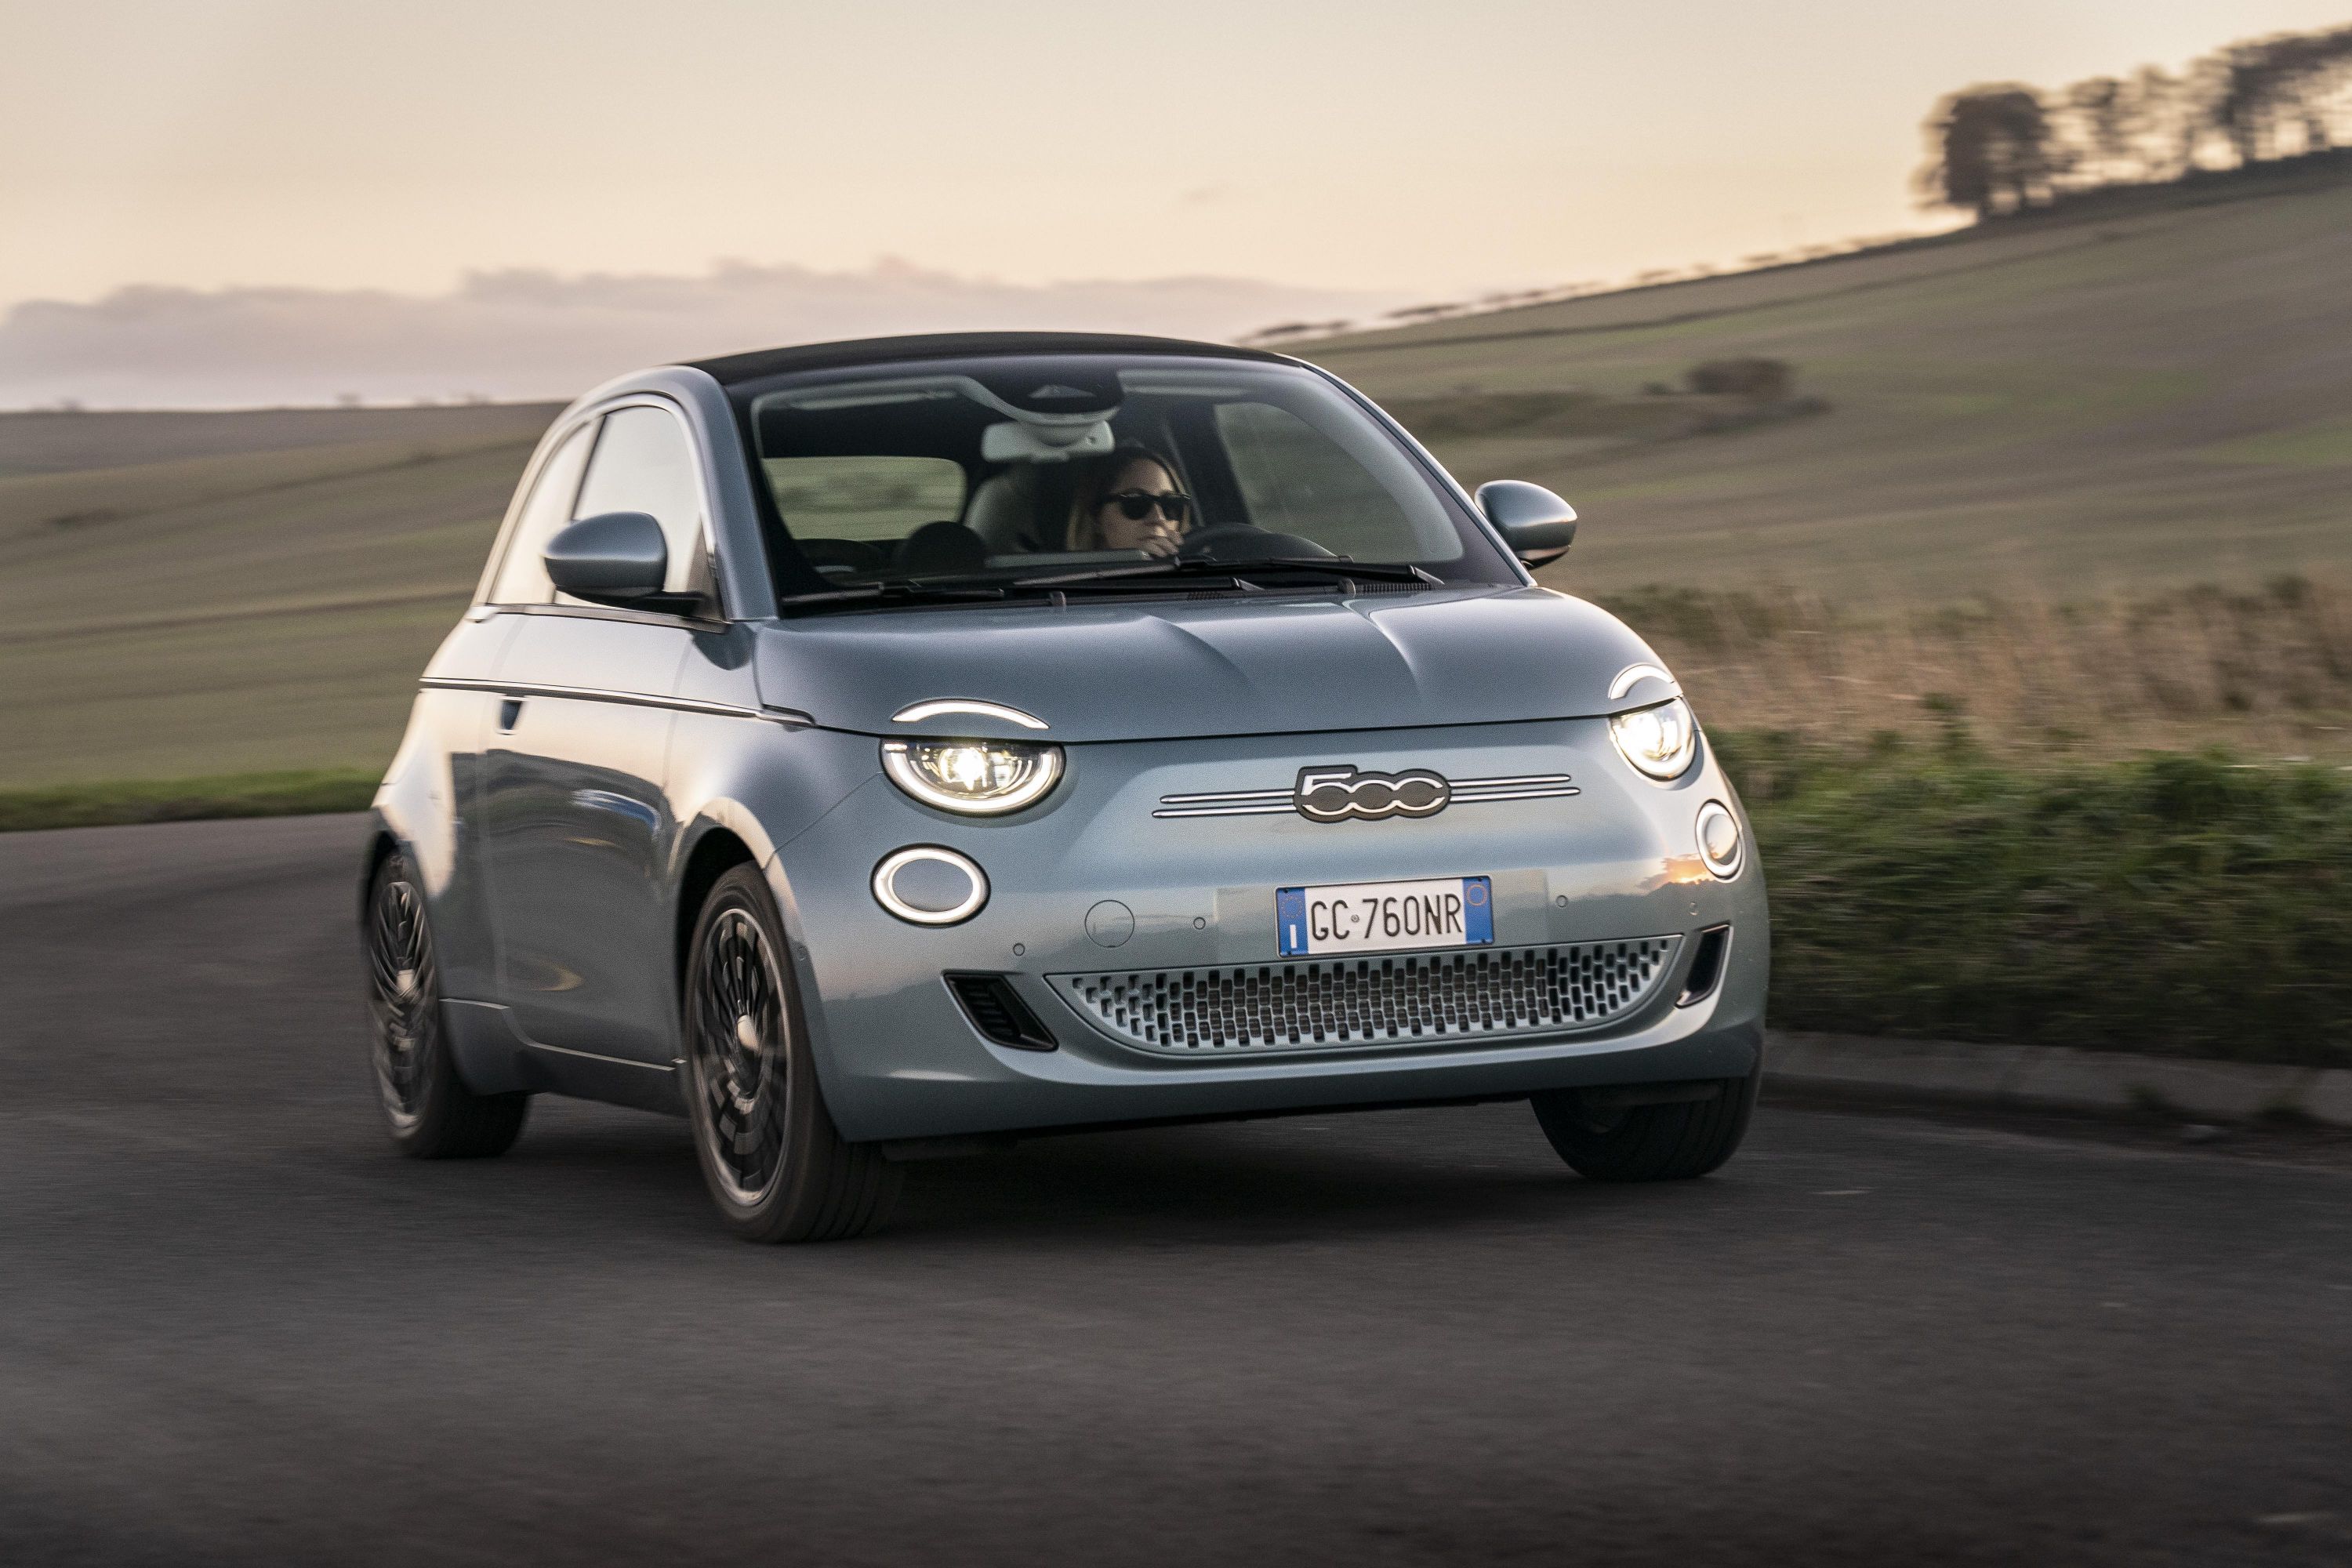 IS X FINALLY A REAL FIAT 500? - Auto.